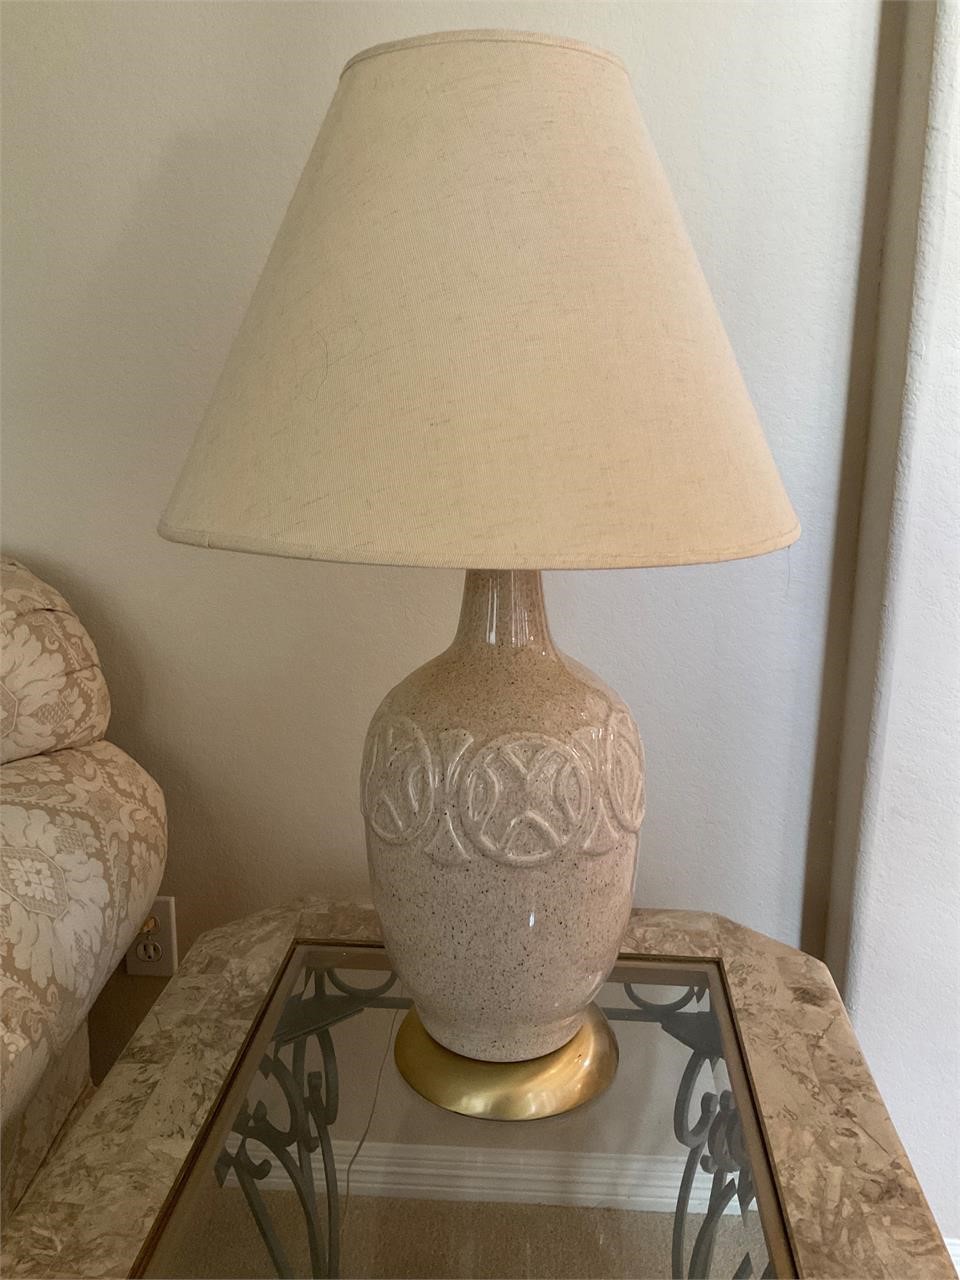 PAIR OF LAMPS WITH SHADES